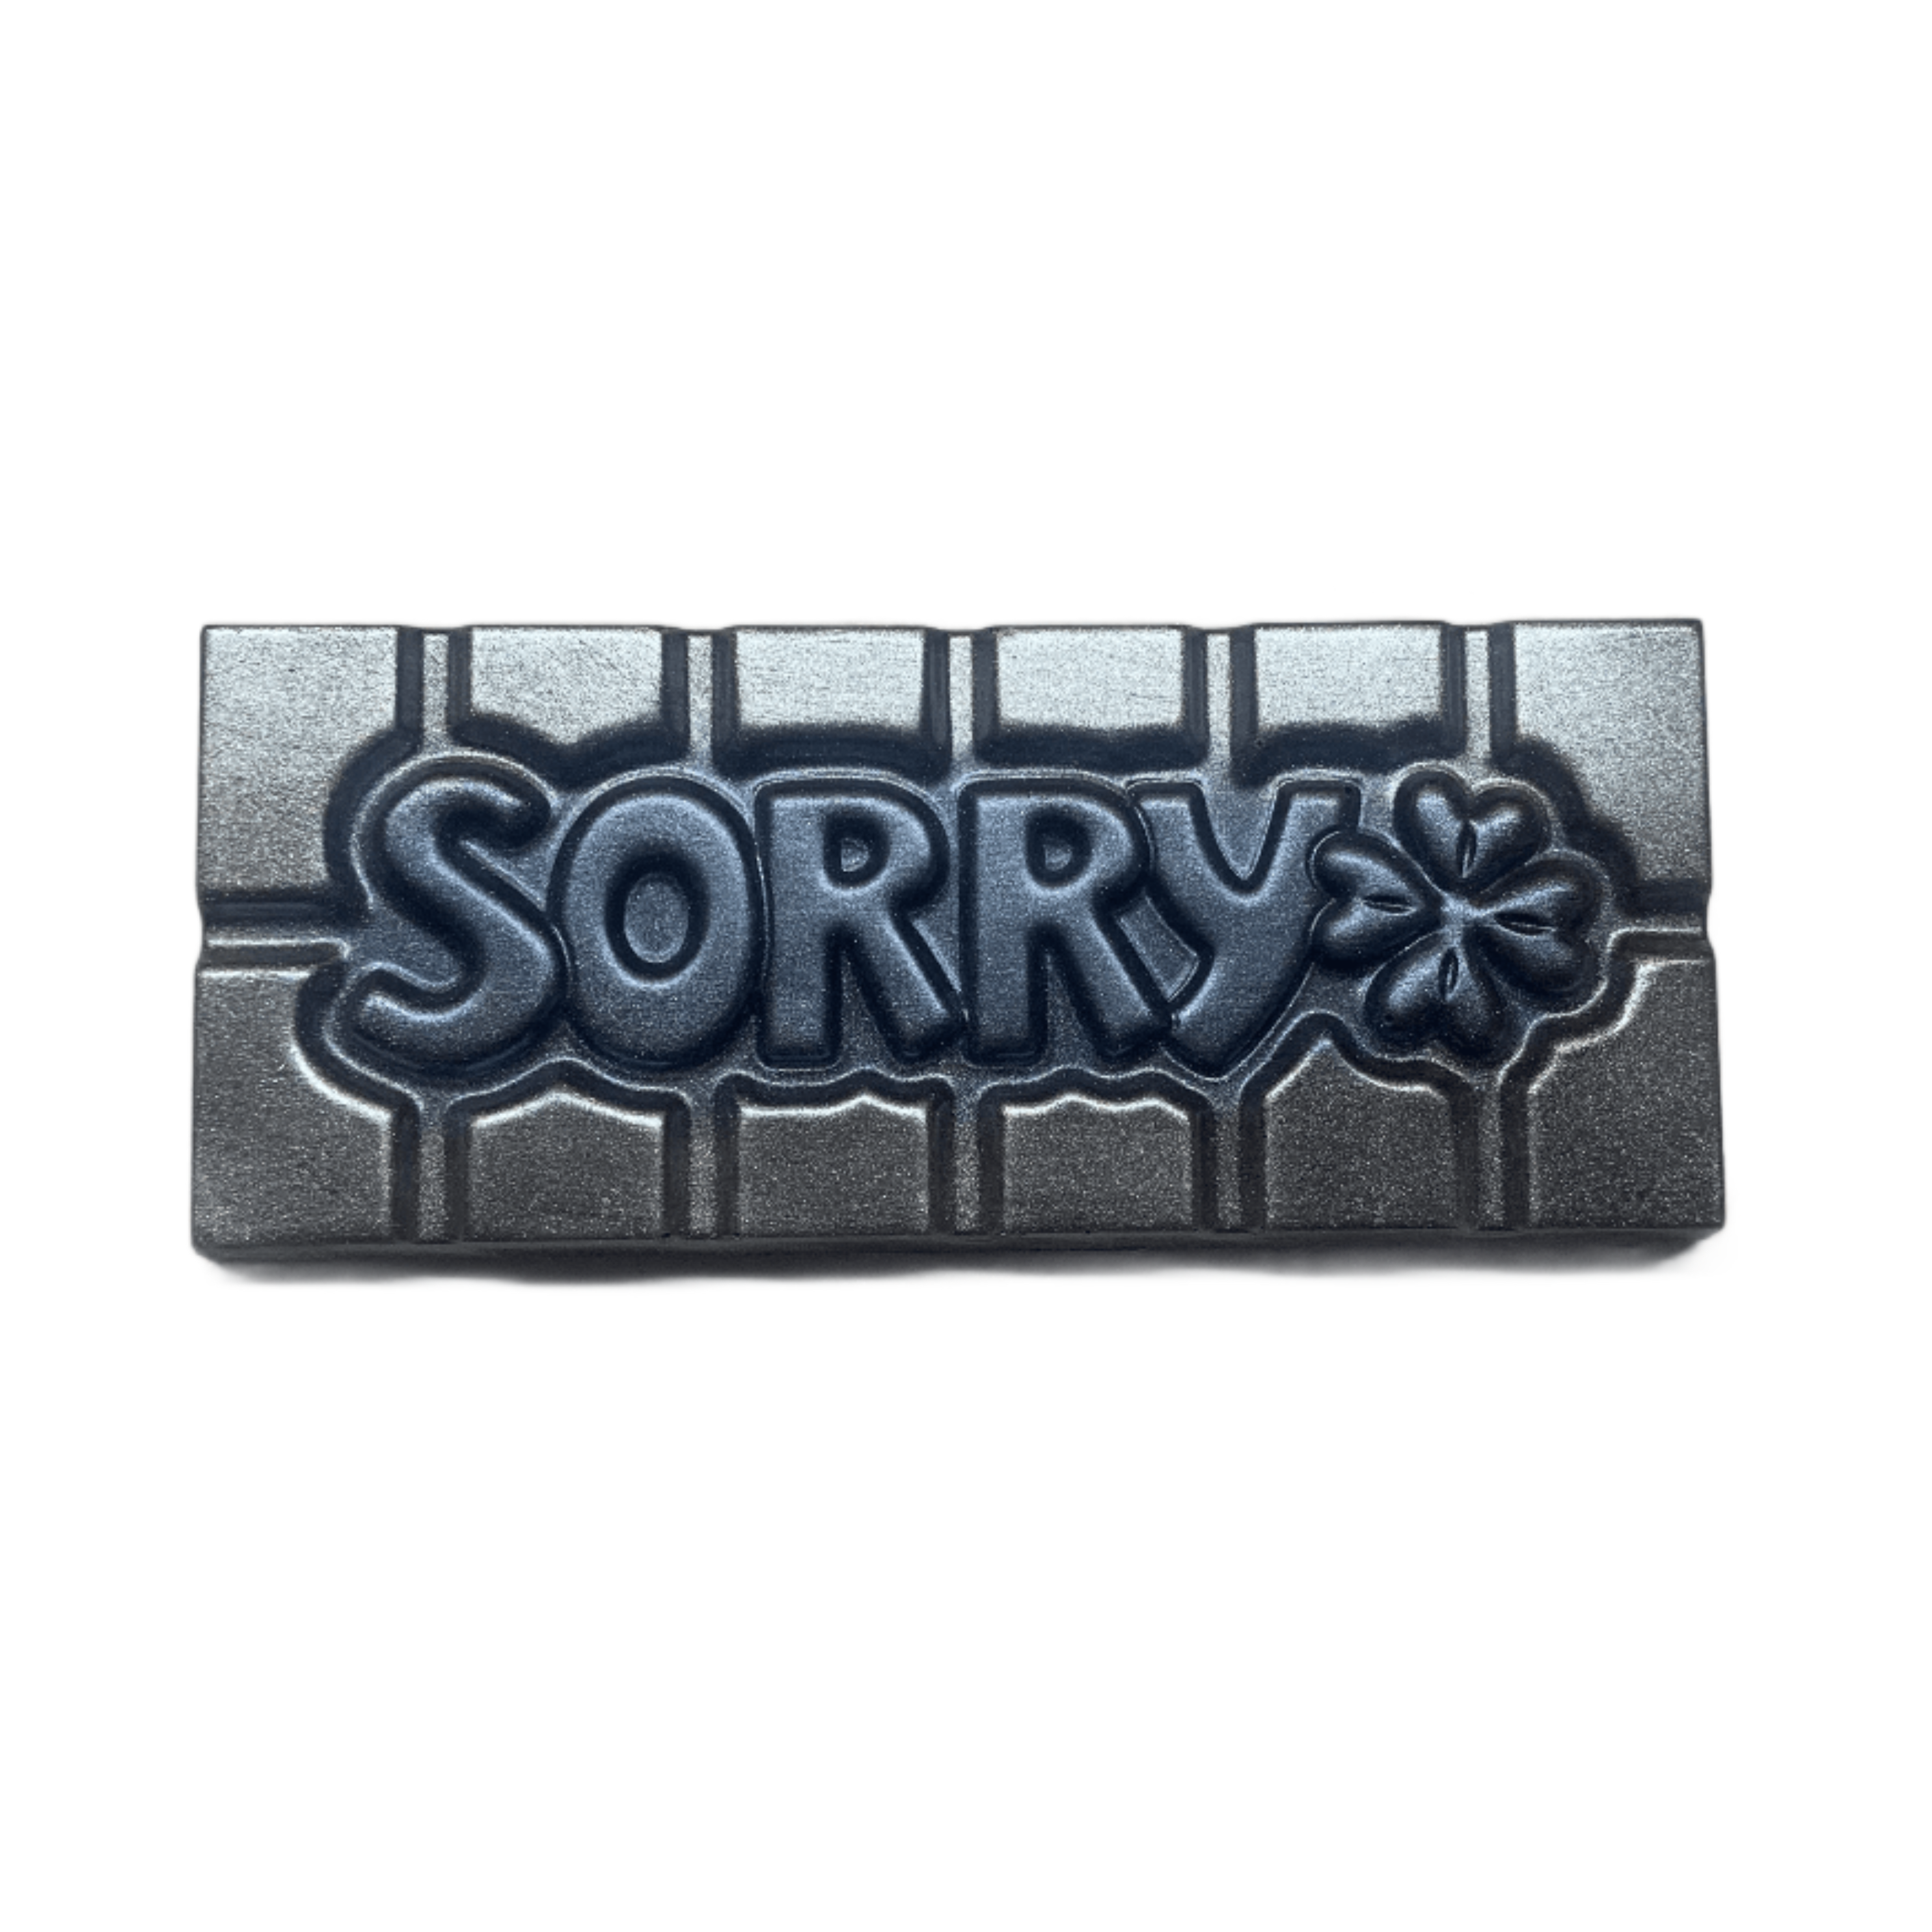 Say_Sorry_Unwrapped-min.png